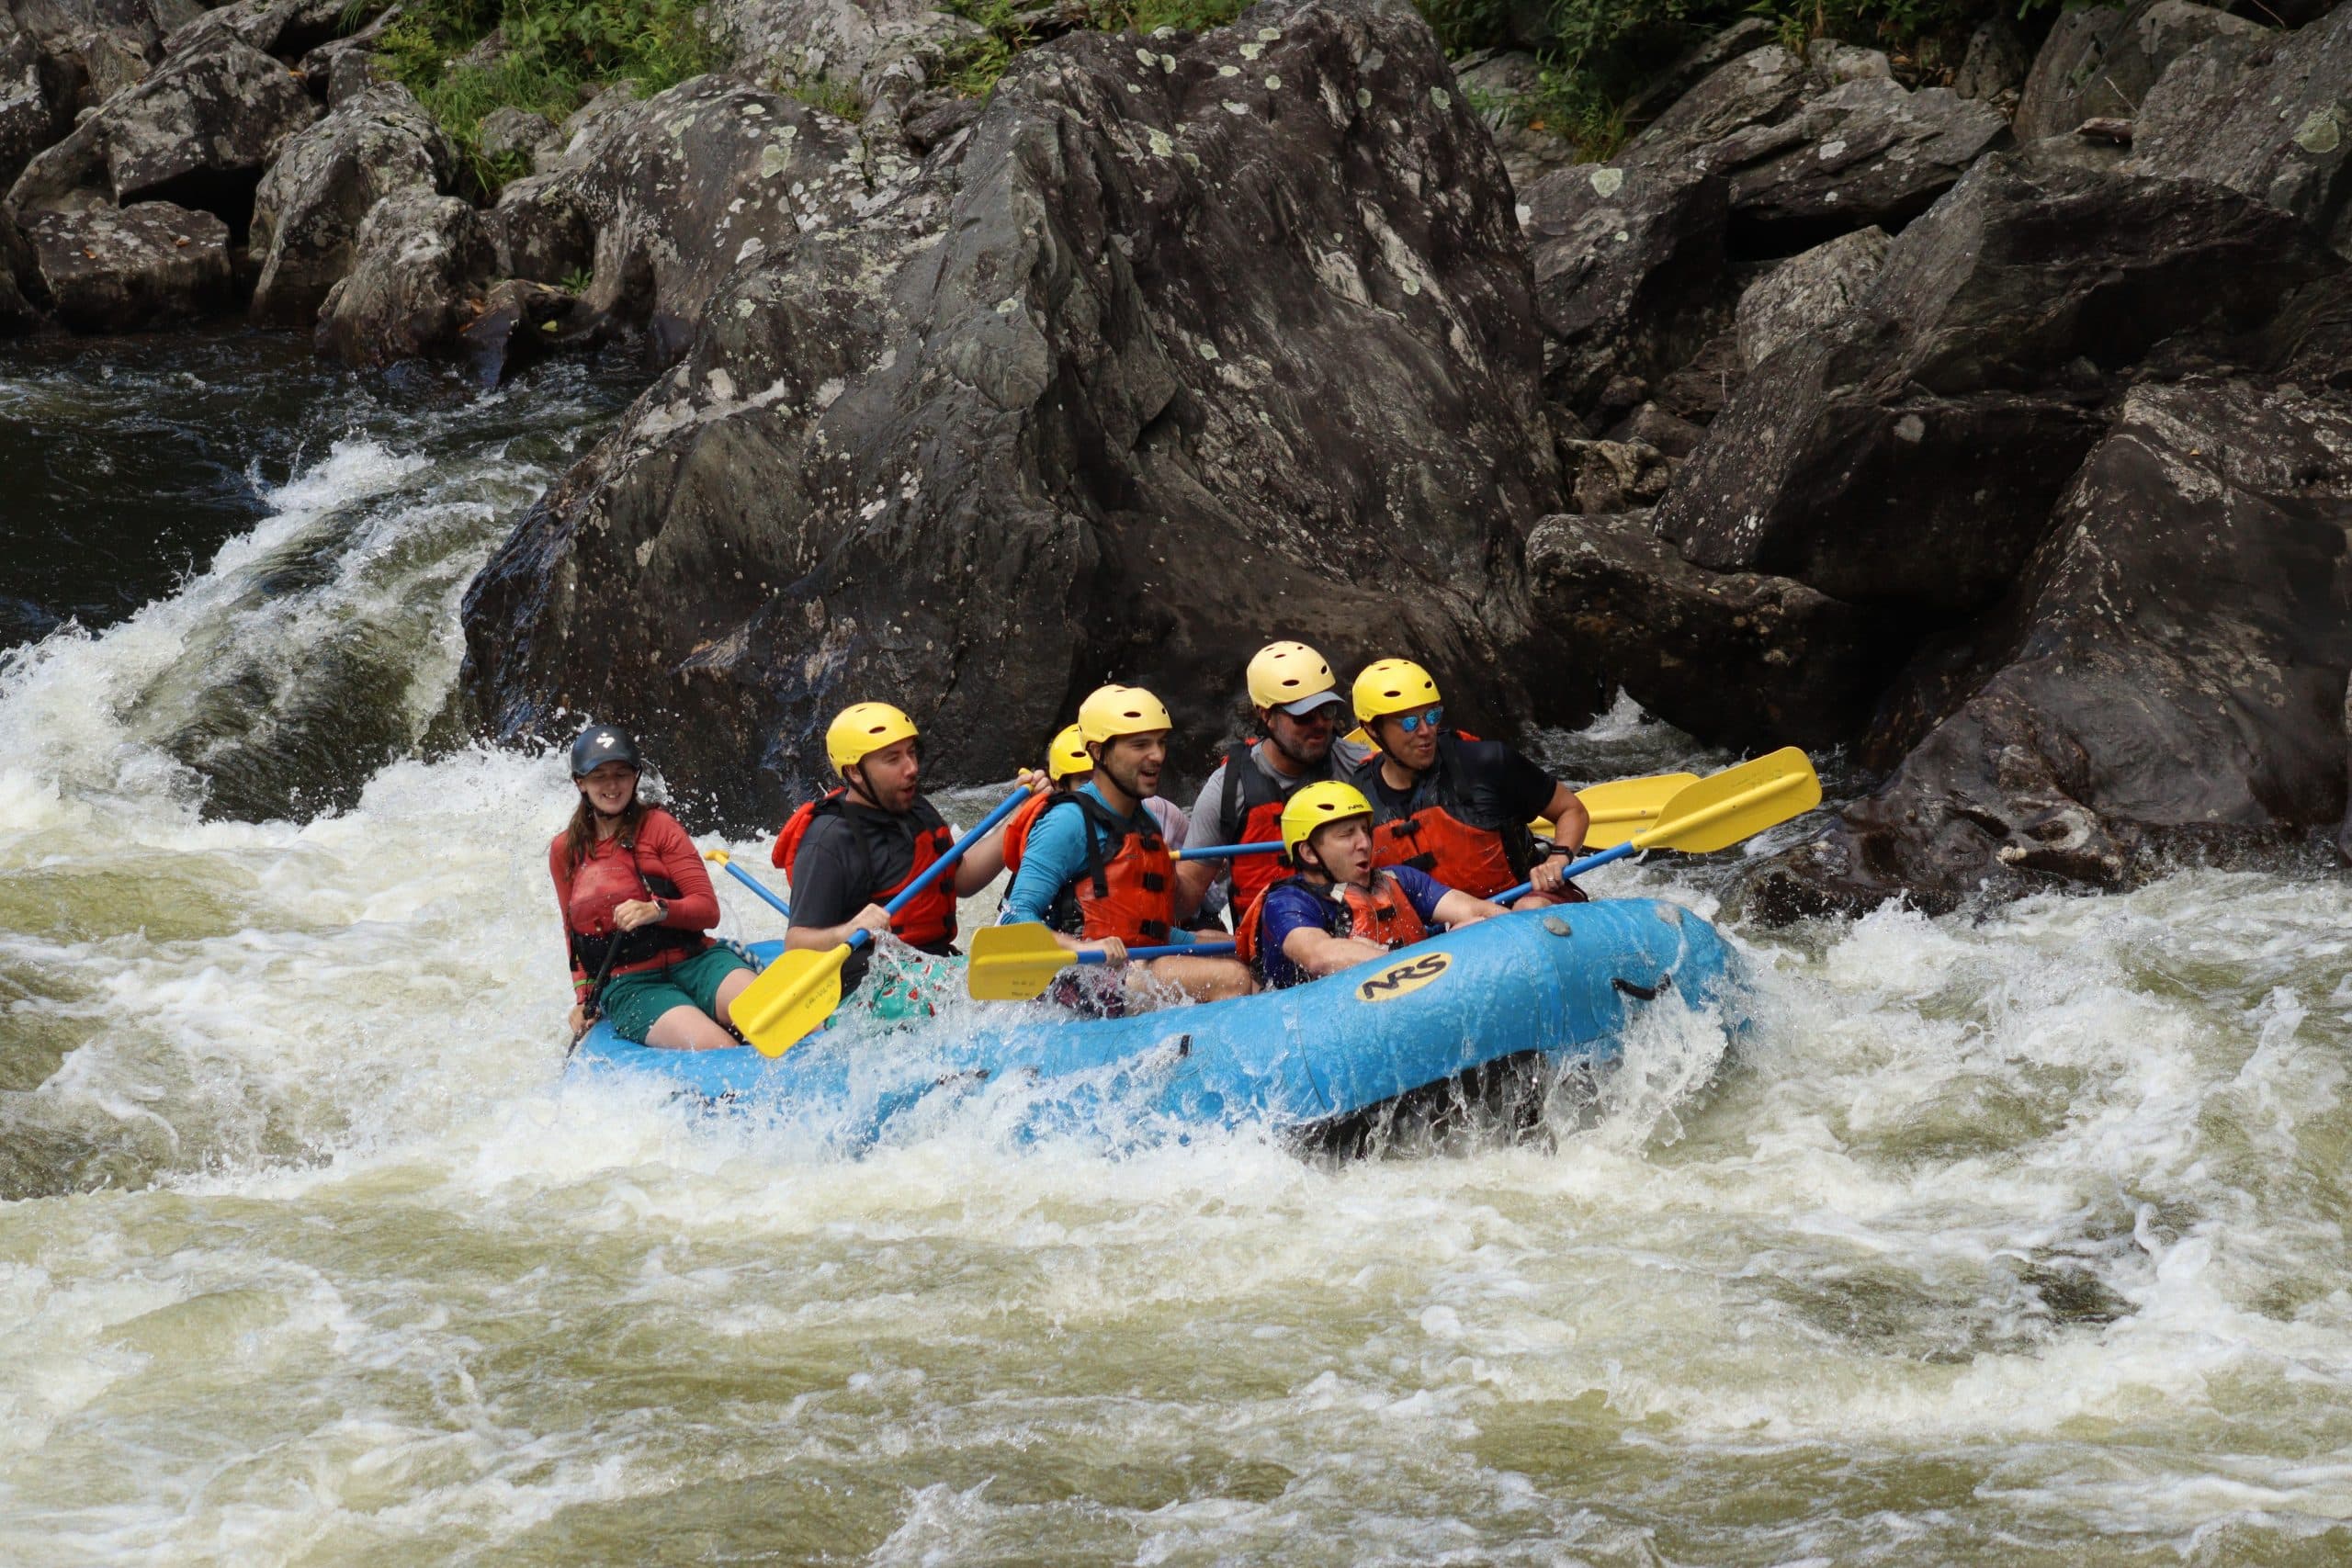 Group of rafters heading through a section of whitewater on a zoar rafting trip